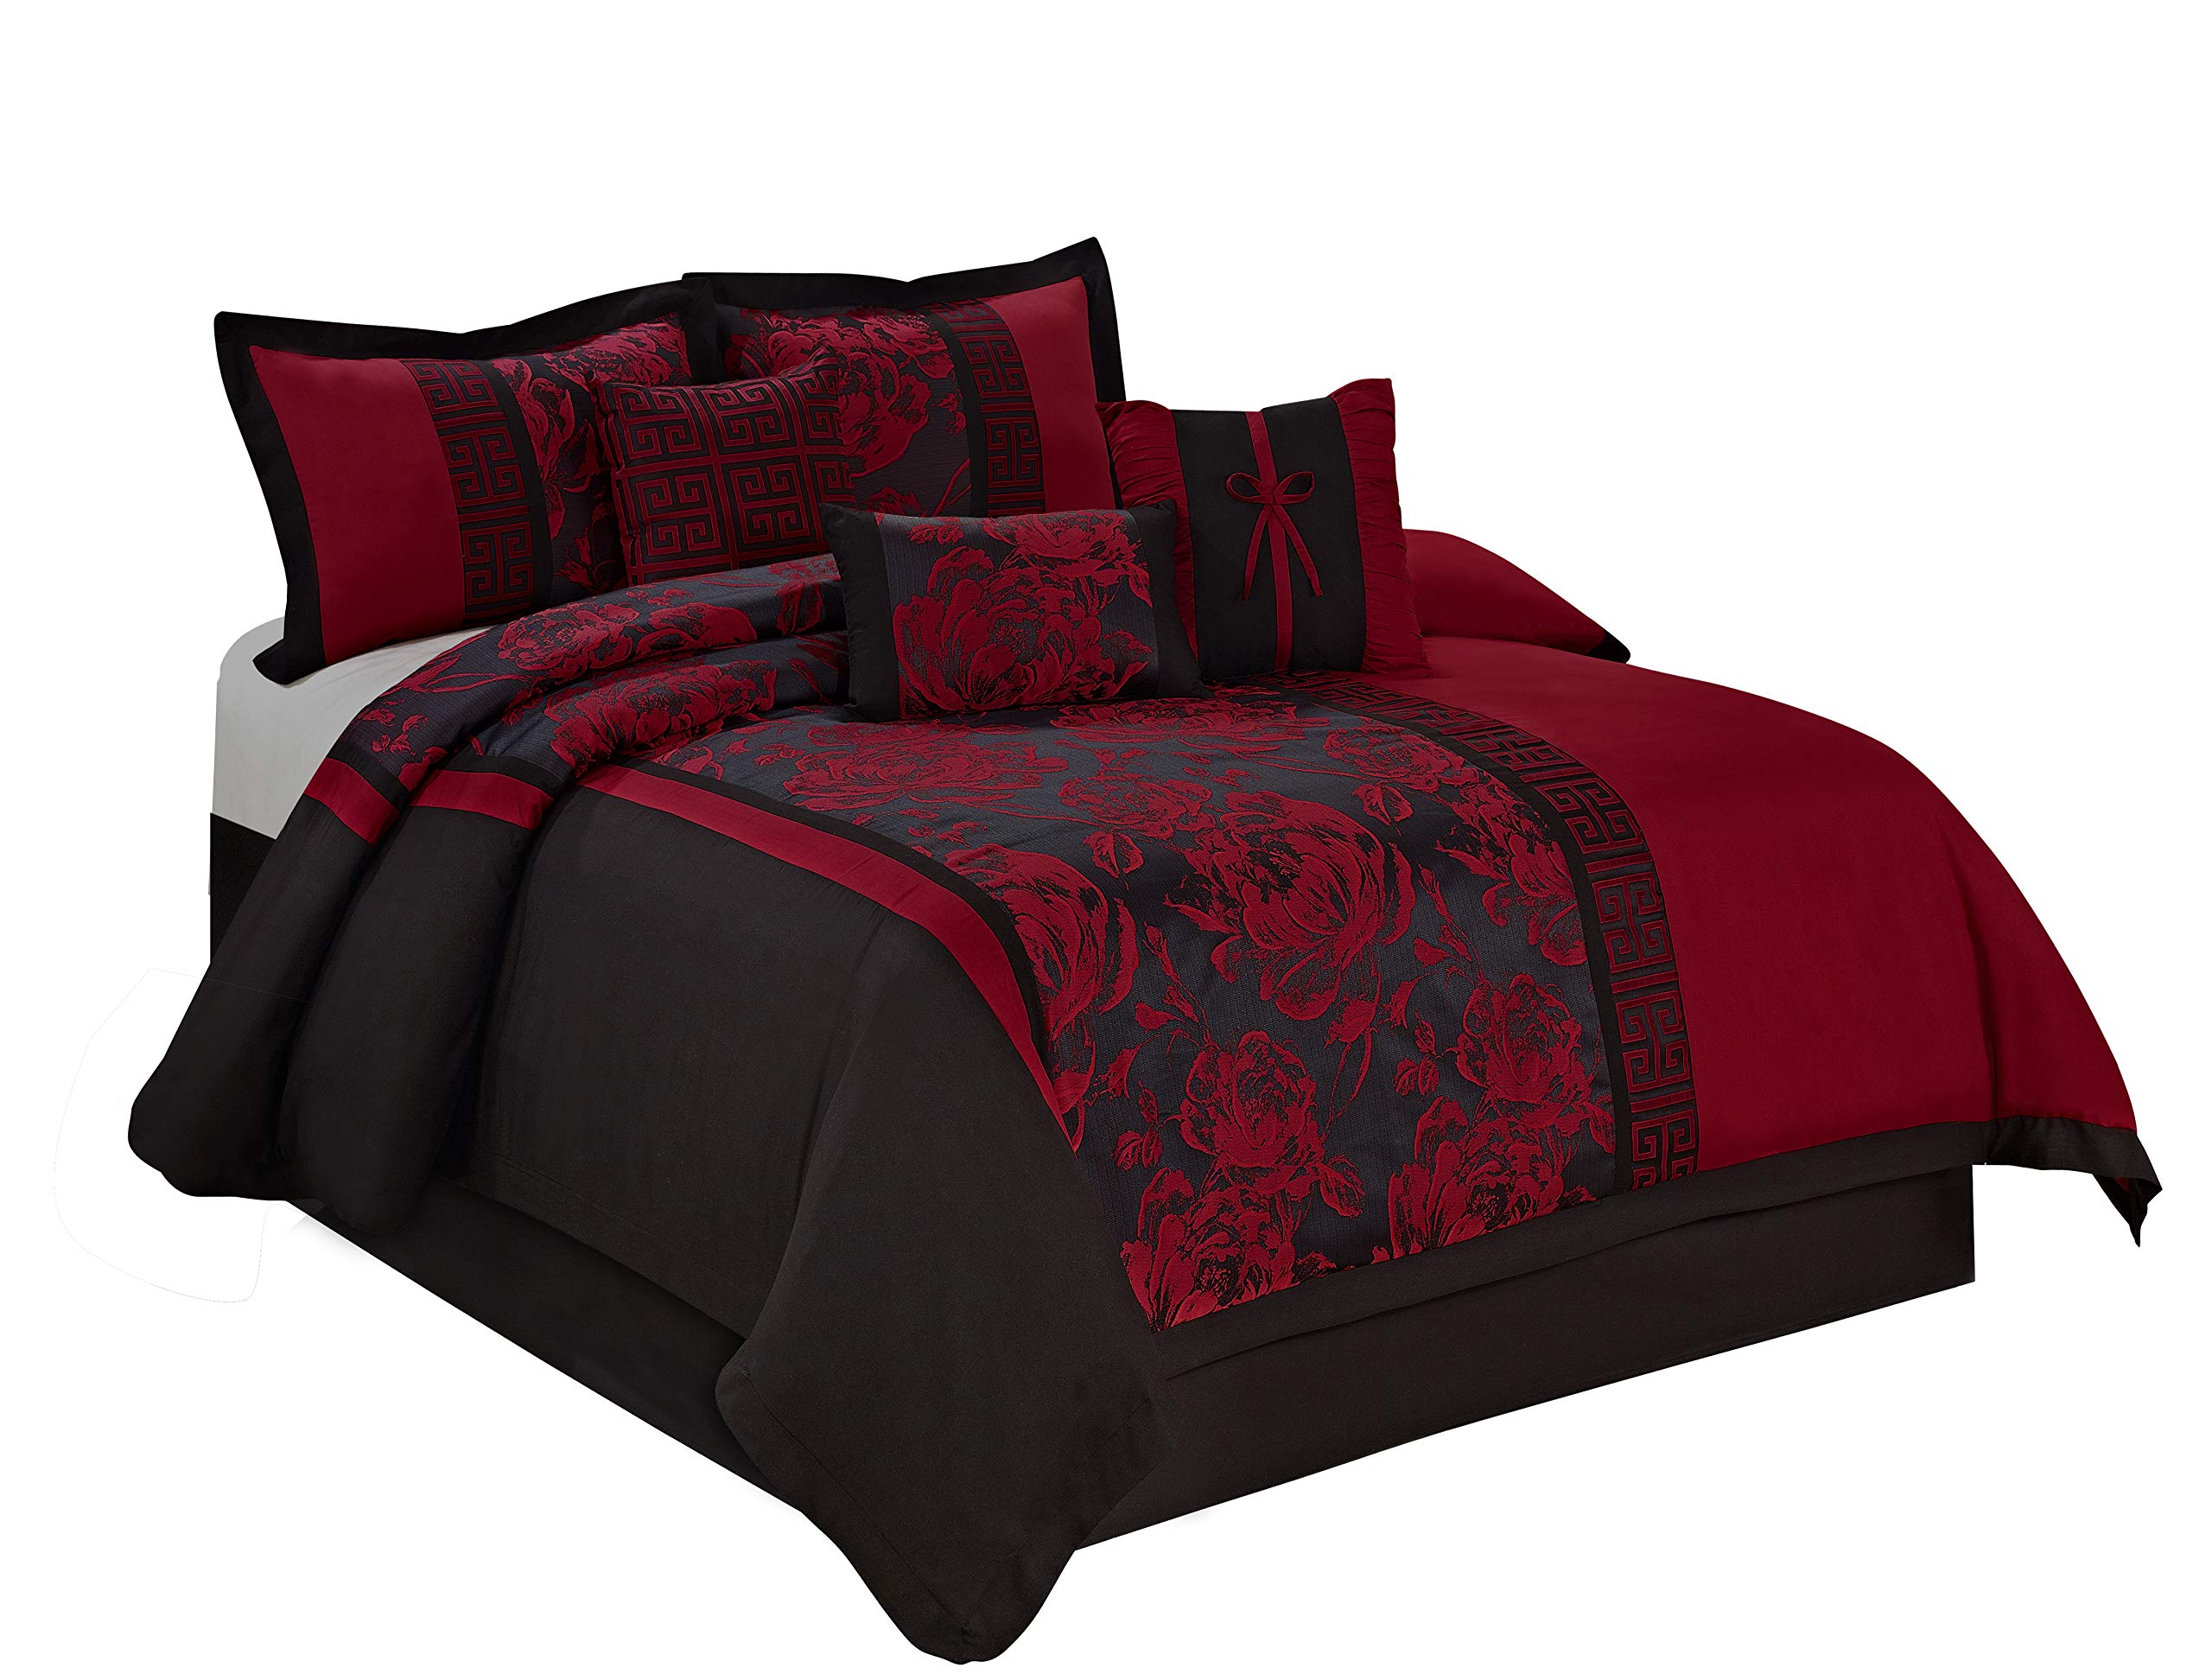 Book Cover BEDnLINENS 7 Piece Comforter Set King - Burgundy Jacquard Fabric Patchwork - Peony Bed in A Bag King Size - Breathable & Long-Lasting - Includes 1 Comforter, 2 Shams, 3 Decorative Pillows, 1 Bedskirt Burgundy King